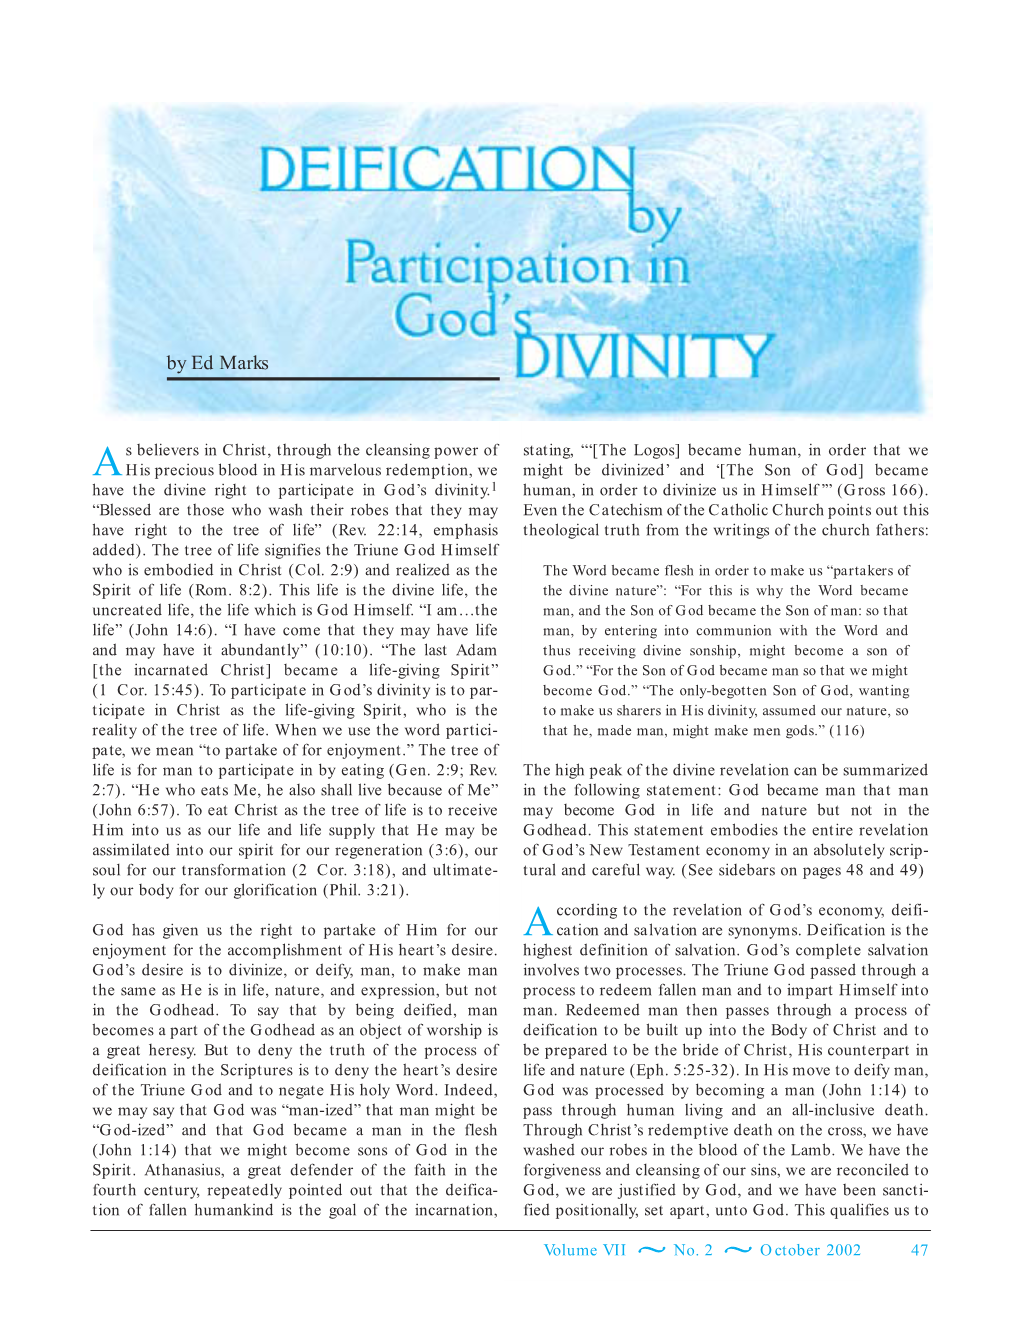 Deification by Participation in God's Divinity